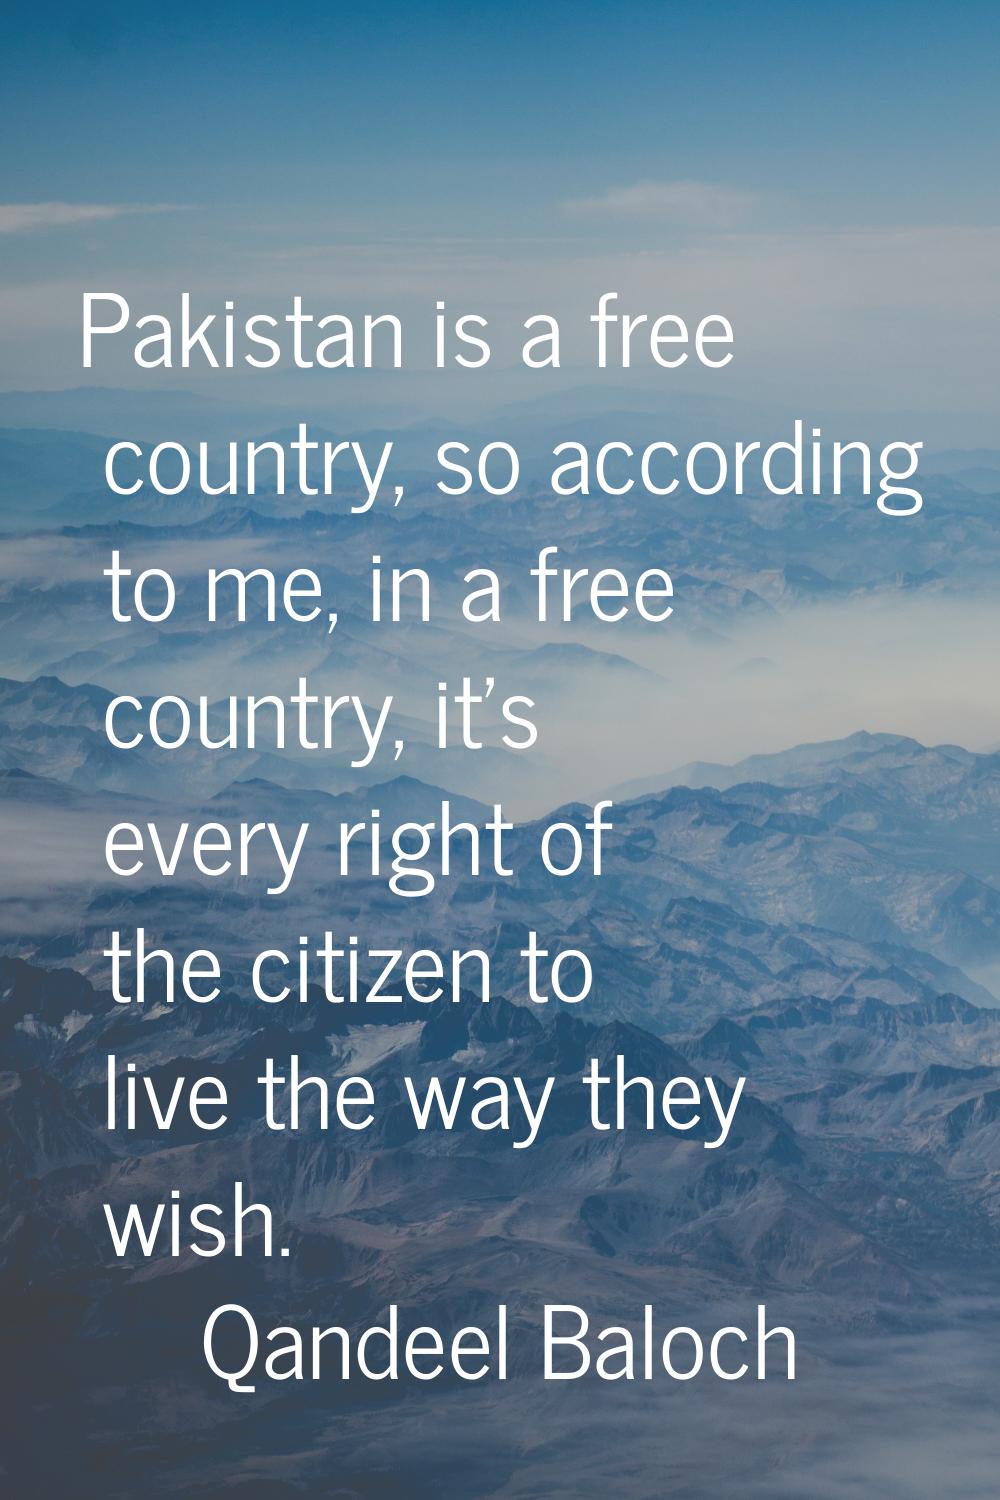 Pakistan is a free country, so according to me, in a free country, it's every right of the citizen 